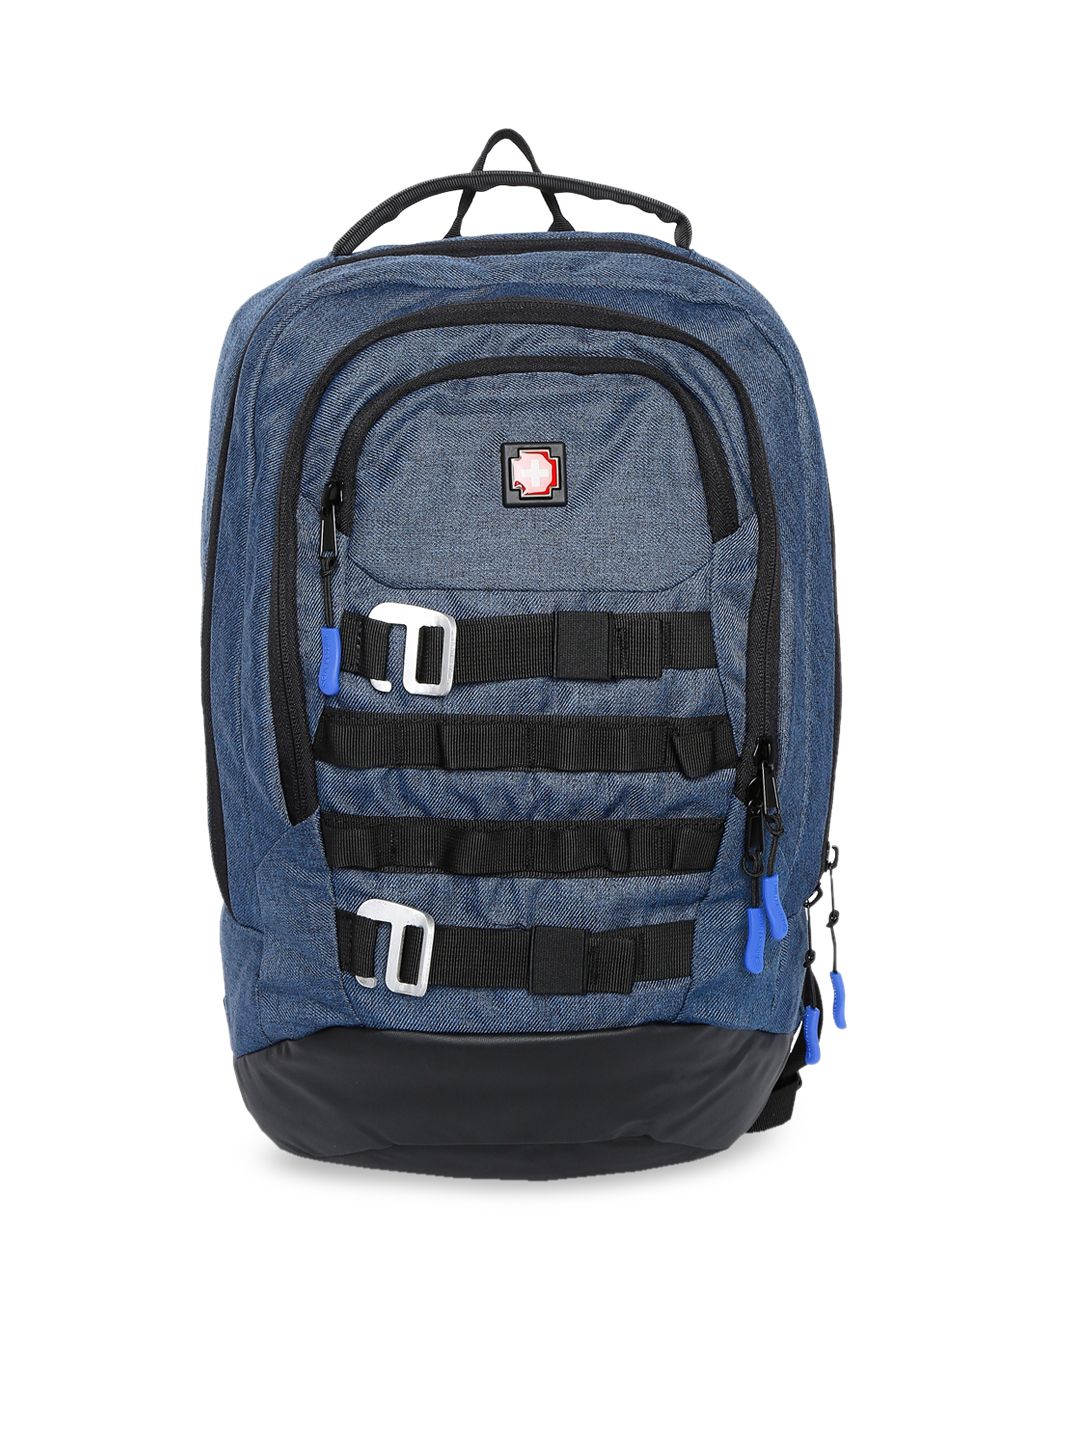 SWISS BRAND Unisex Navy Blue Solid Backpack Price in India